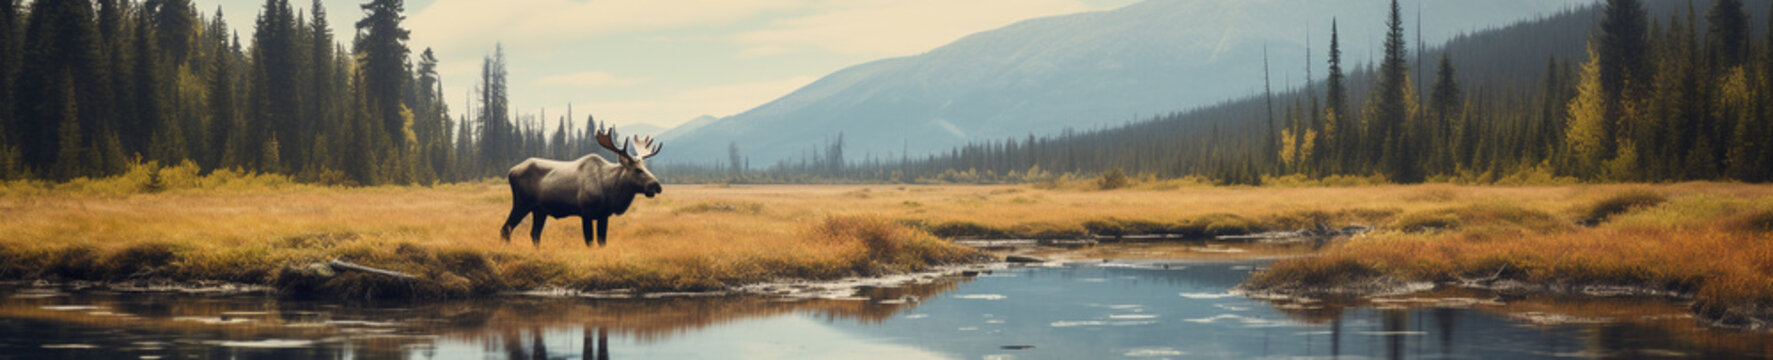 A Banner Photo of a Moose in Nature